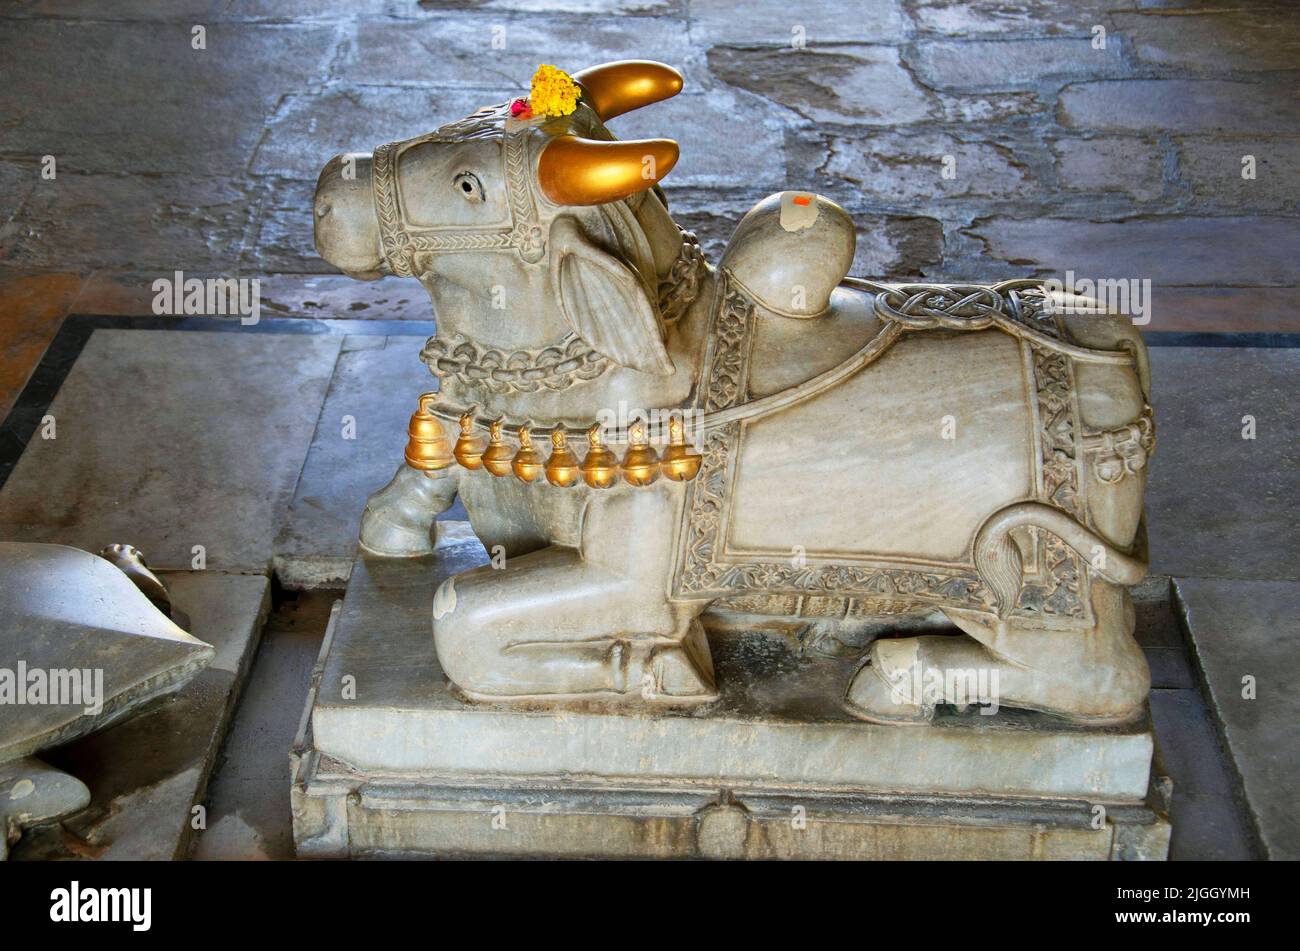 Idol of lord Nandi in a small temple in the Kirti Mandir complex, the cenotaph of the Gaekwads, Vadodara, Gujarat, India Stock Photo